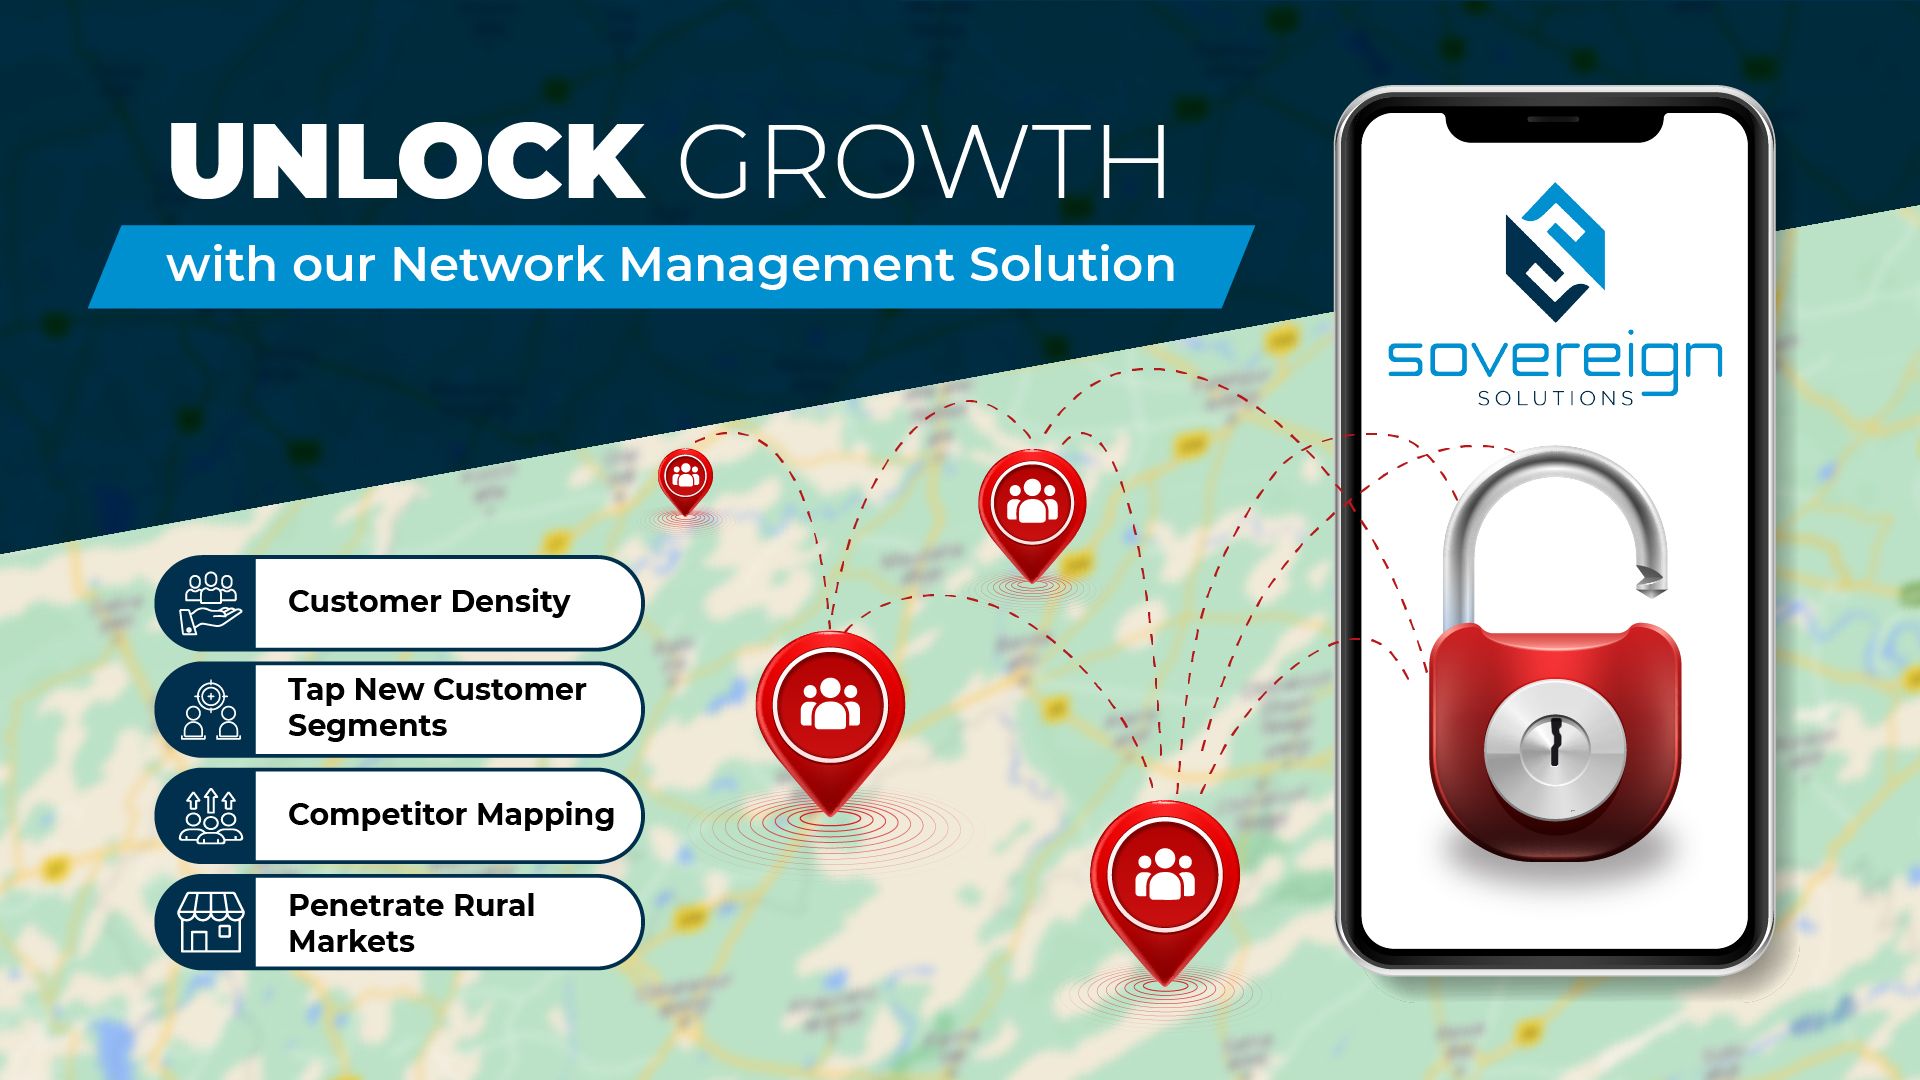 Network Management Solutions